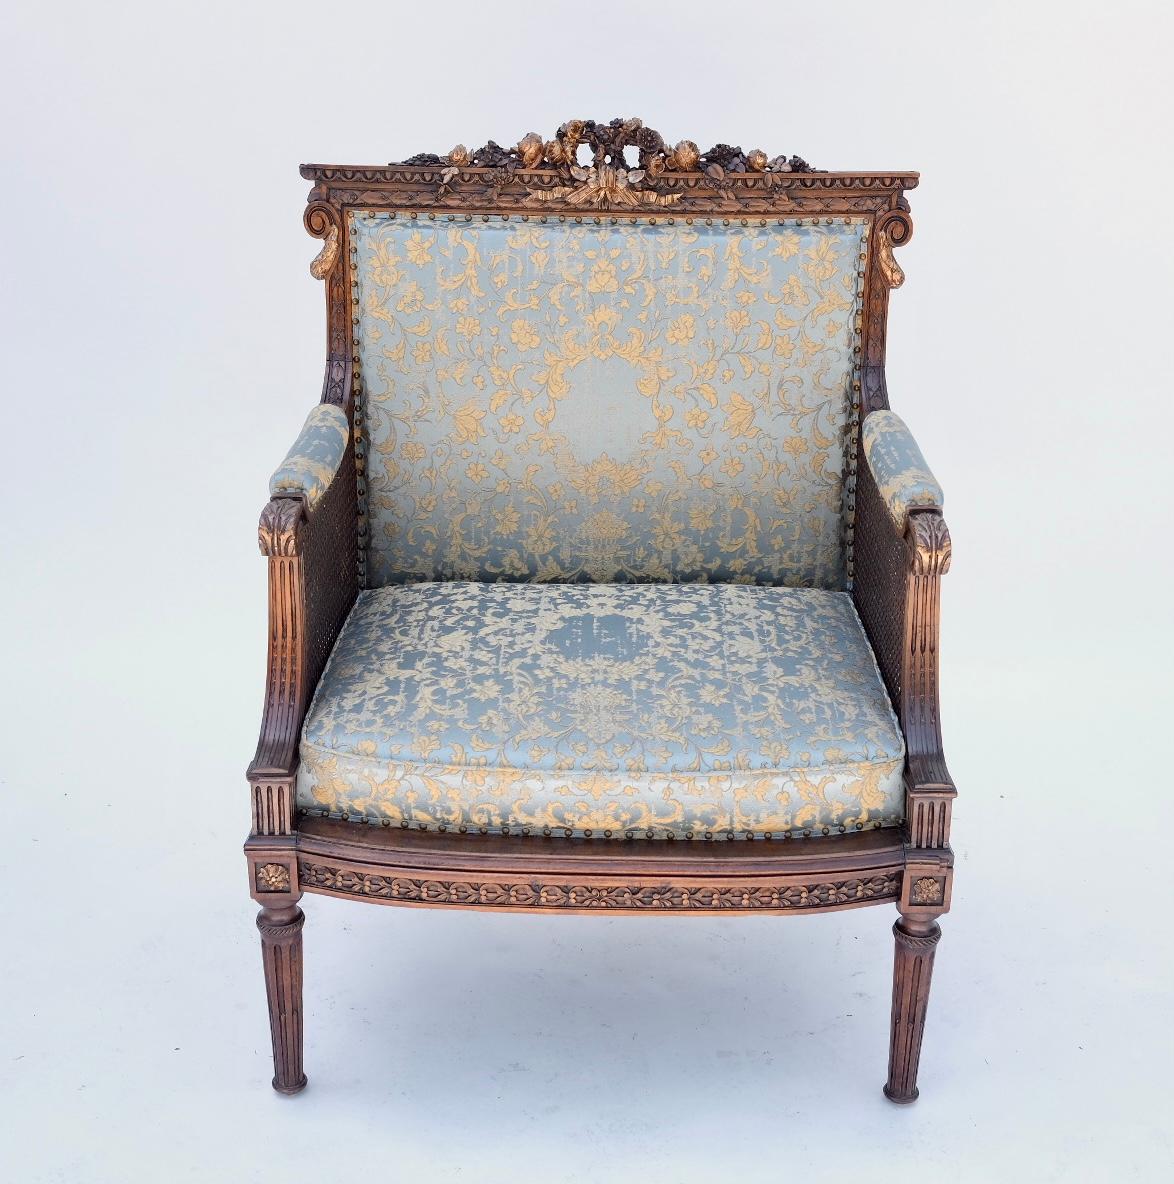 19th century. French. Finely carved walnut. Newly upholstered in Rubelli fabric.